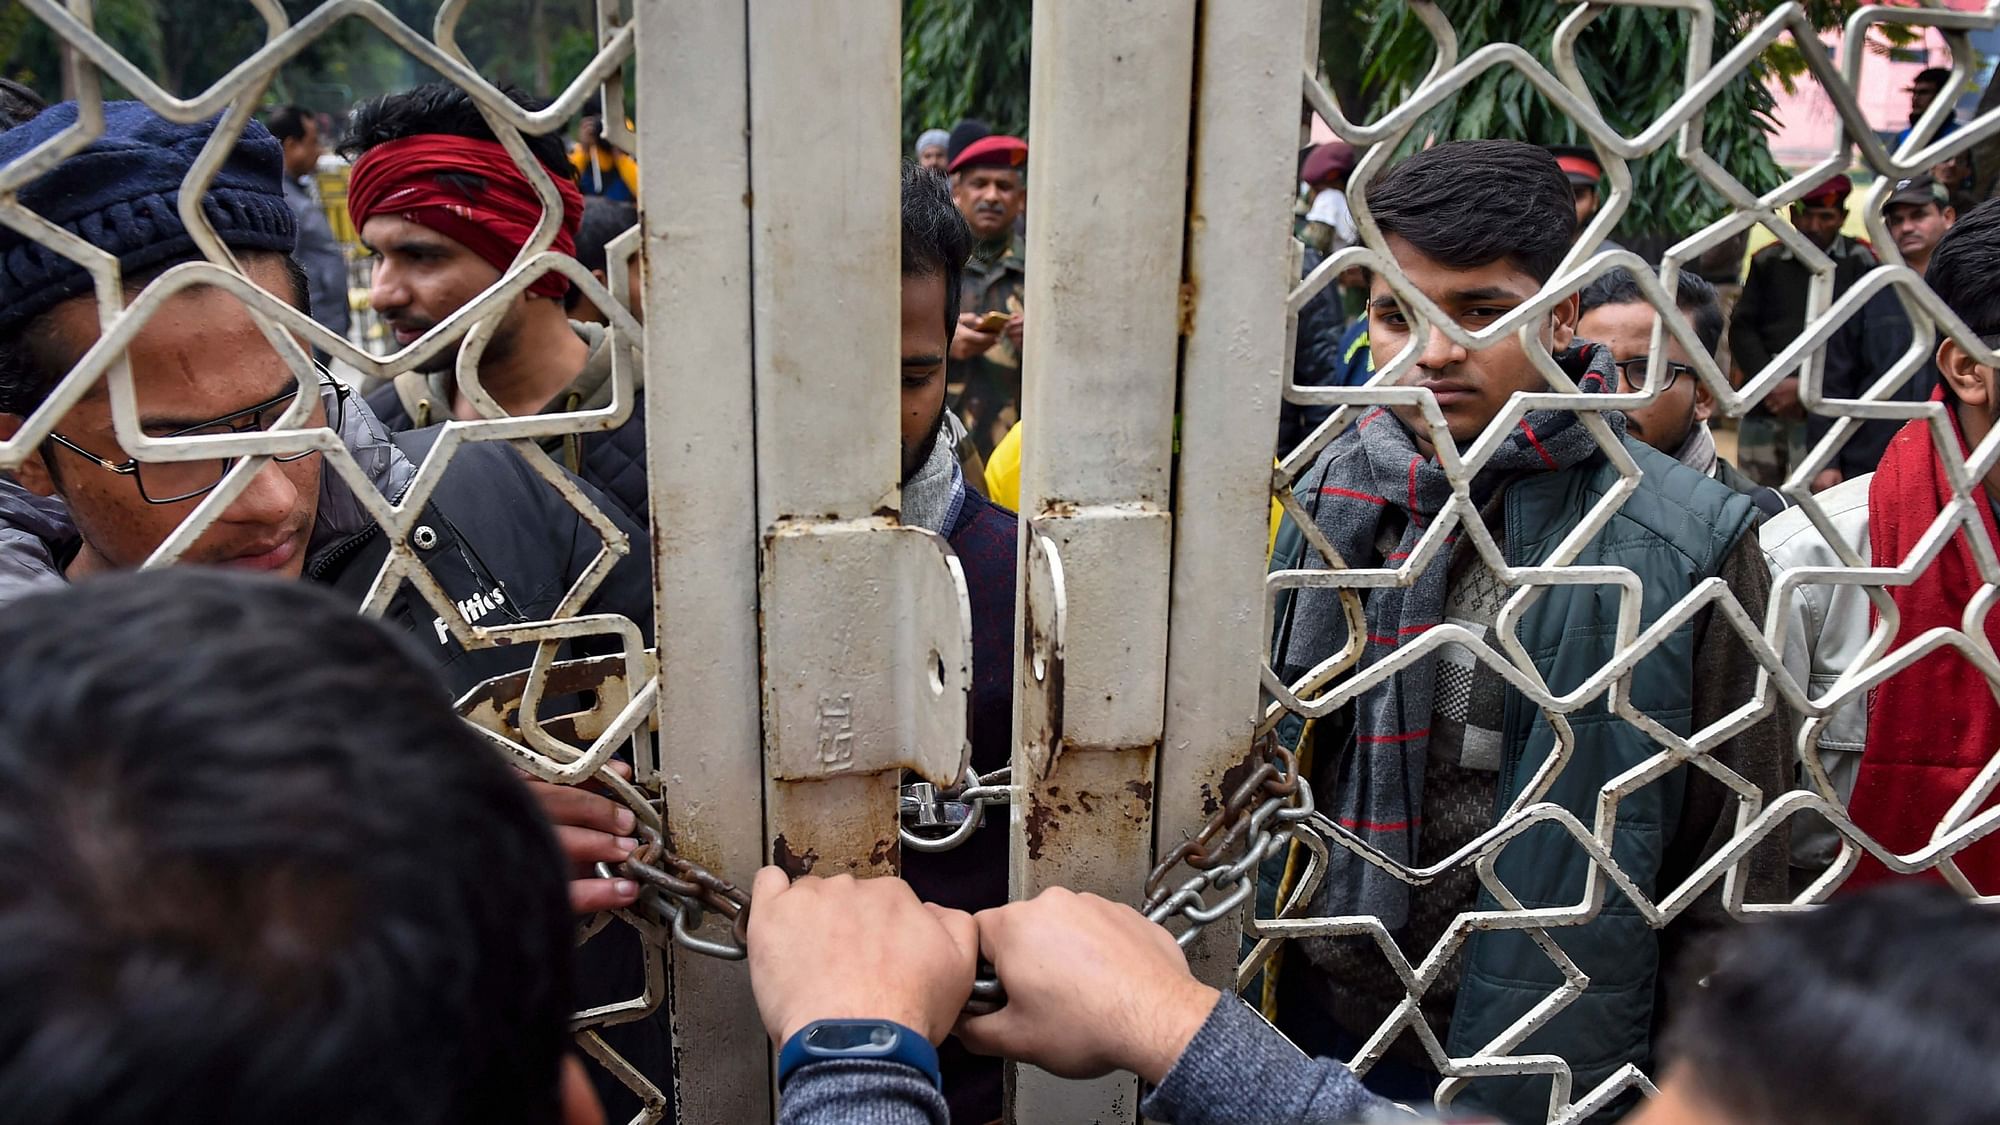 Jamia students try to break a lock to enter the vice chancellor’s office, demanding an FIR against Delhi Police’s use of force against students on 15 December 2019.